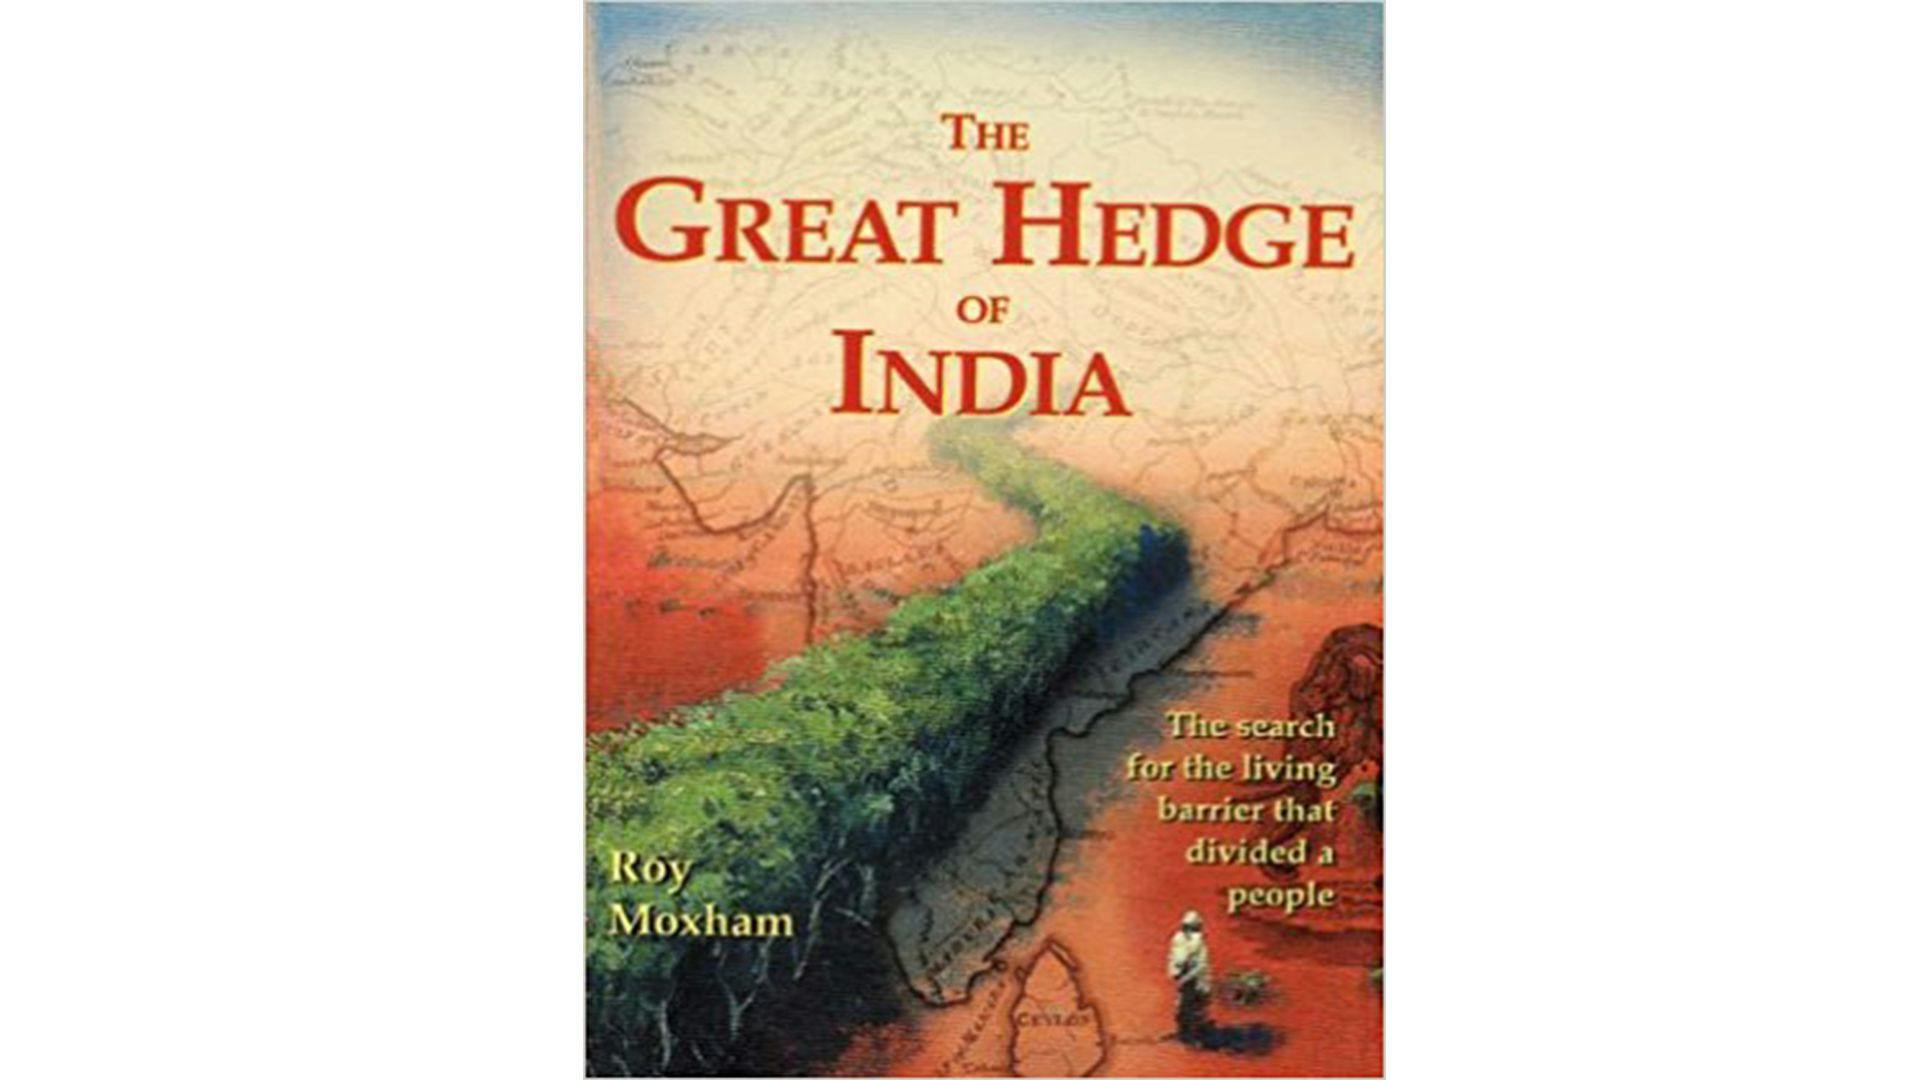 The book The Great Hedge of India by Roy Moxham